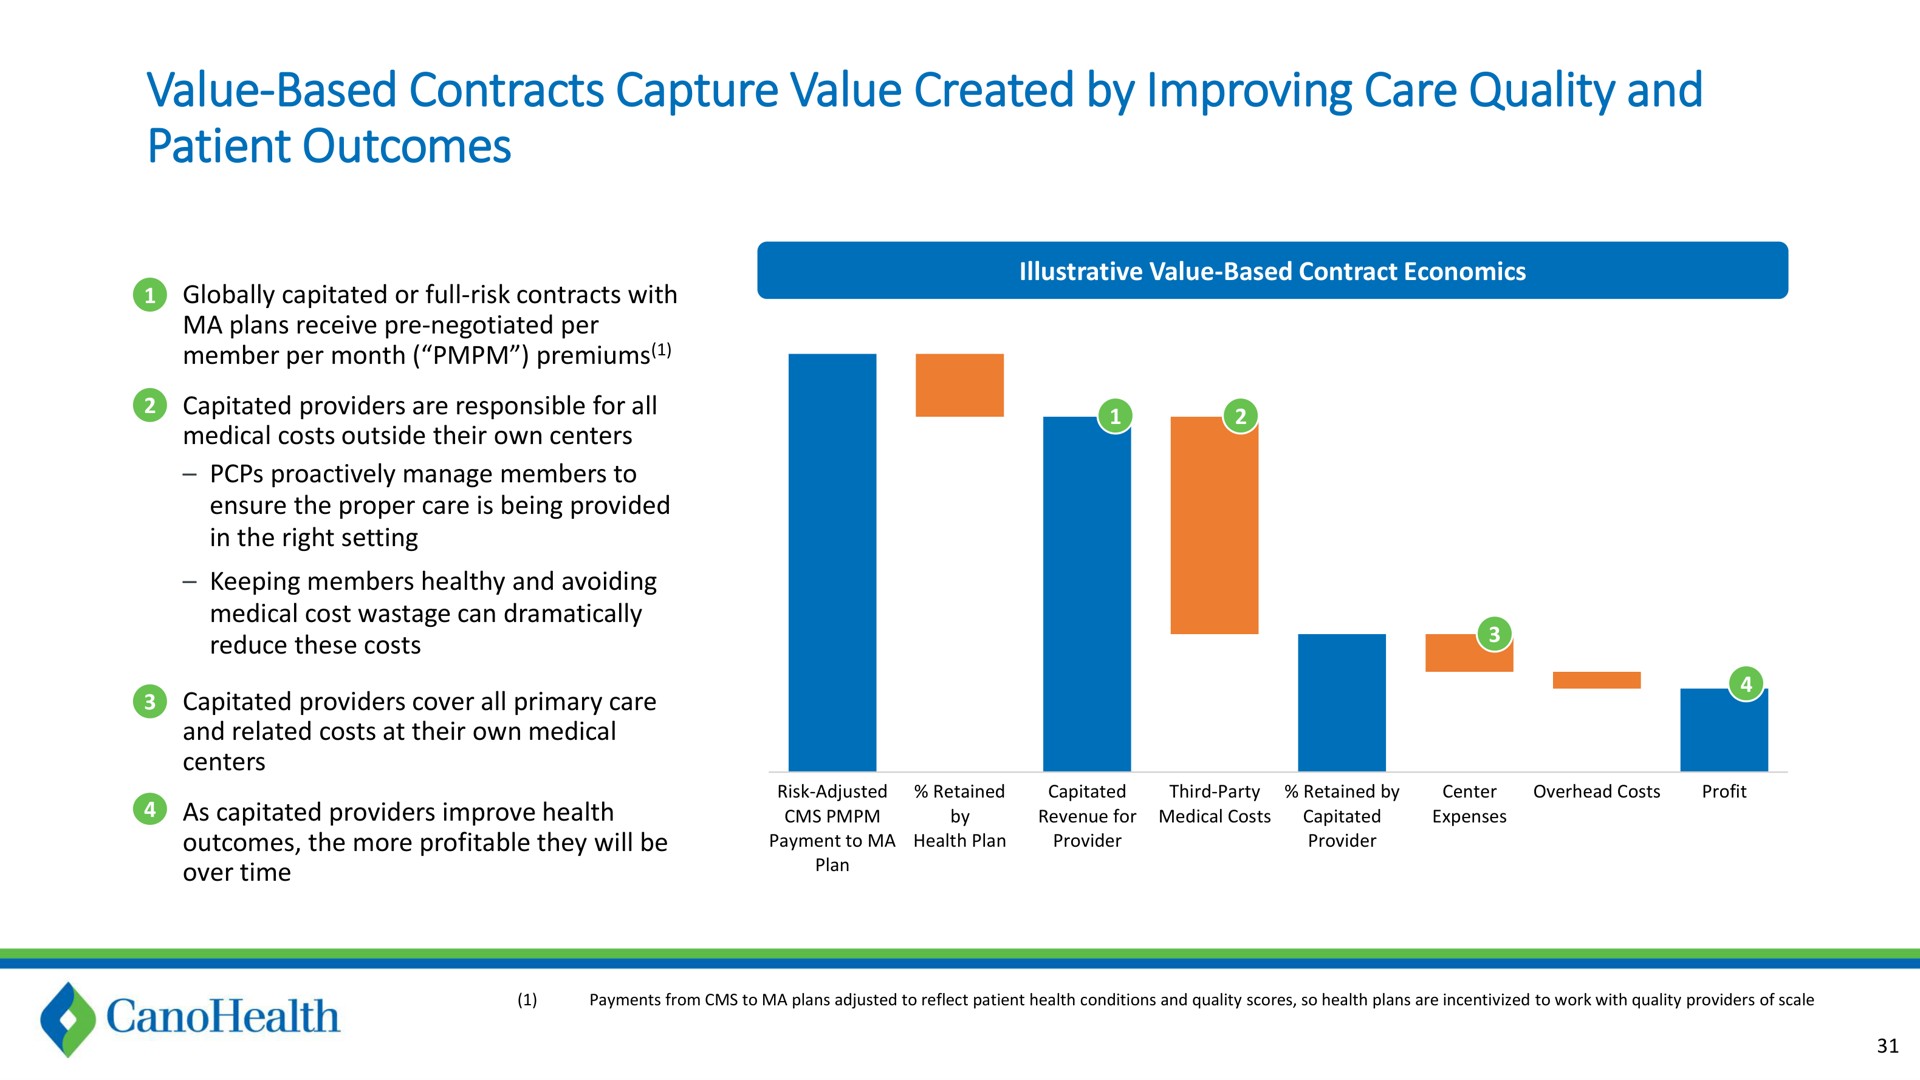 value based contracts capture value created by improving care quality and patient outcomes | Cano Health